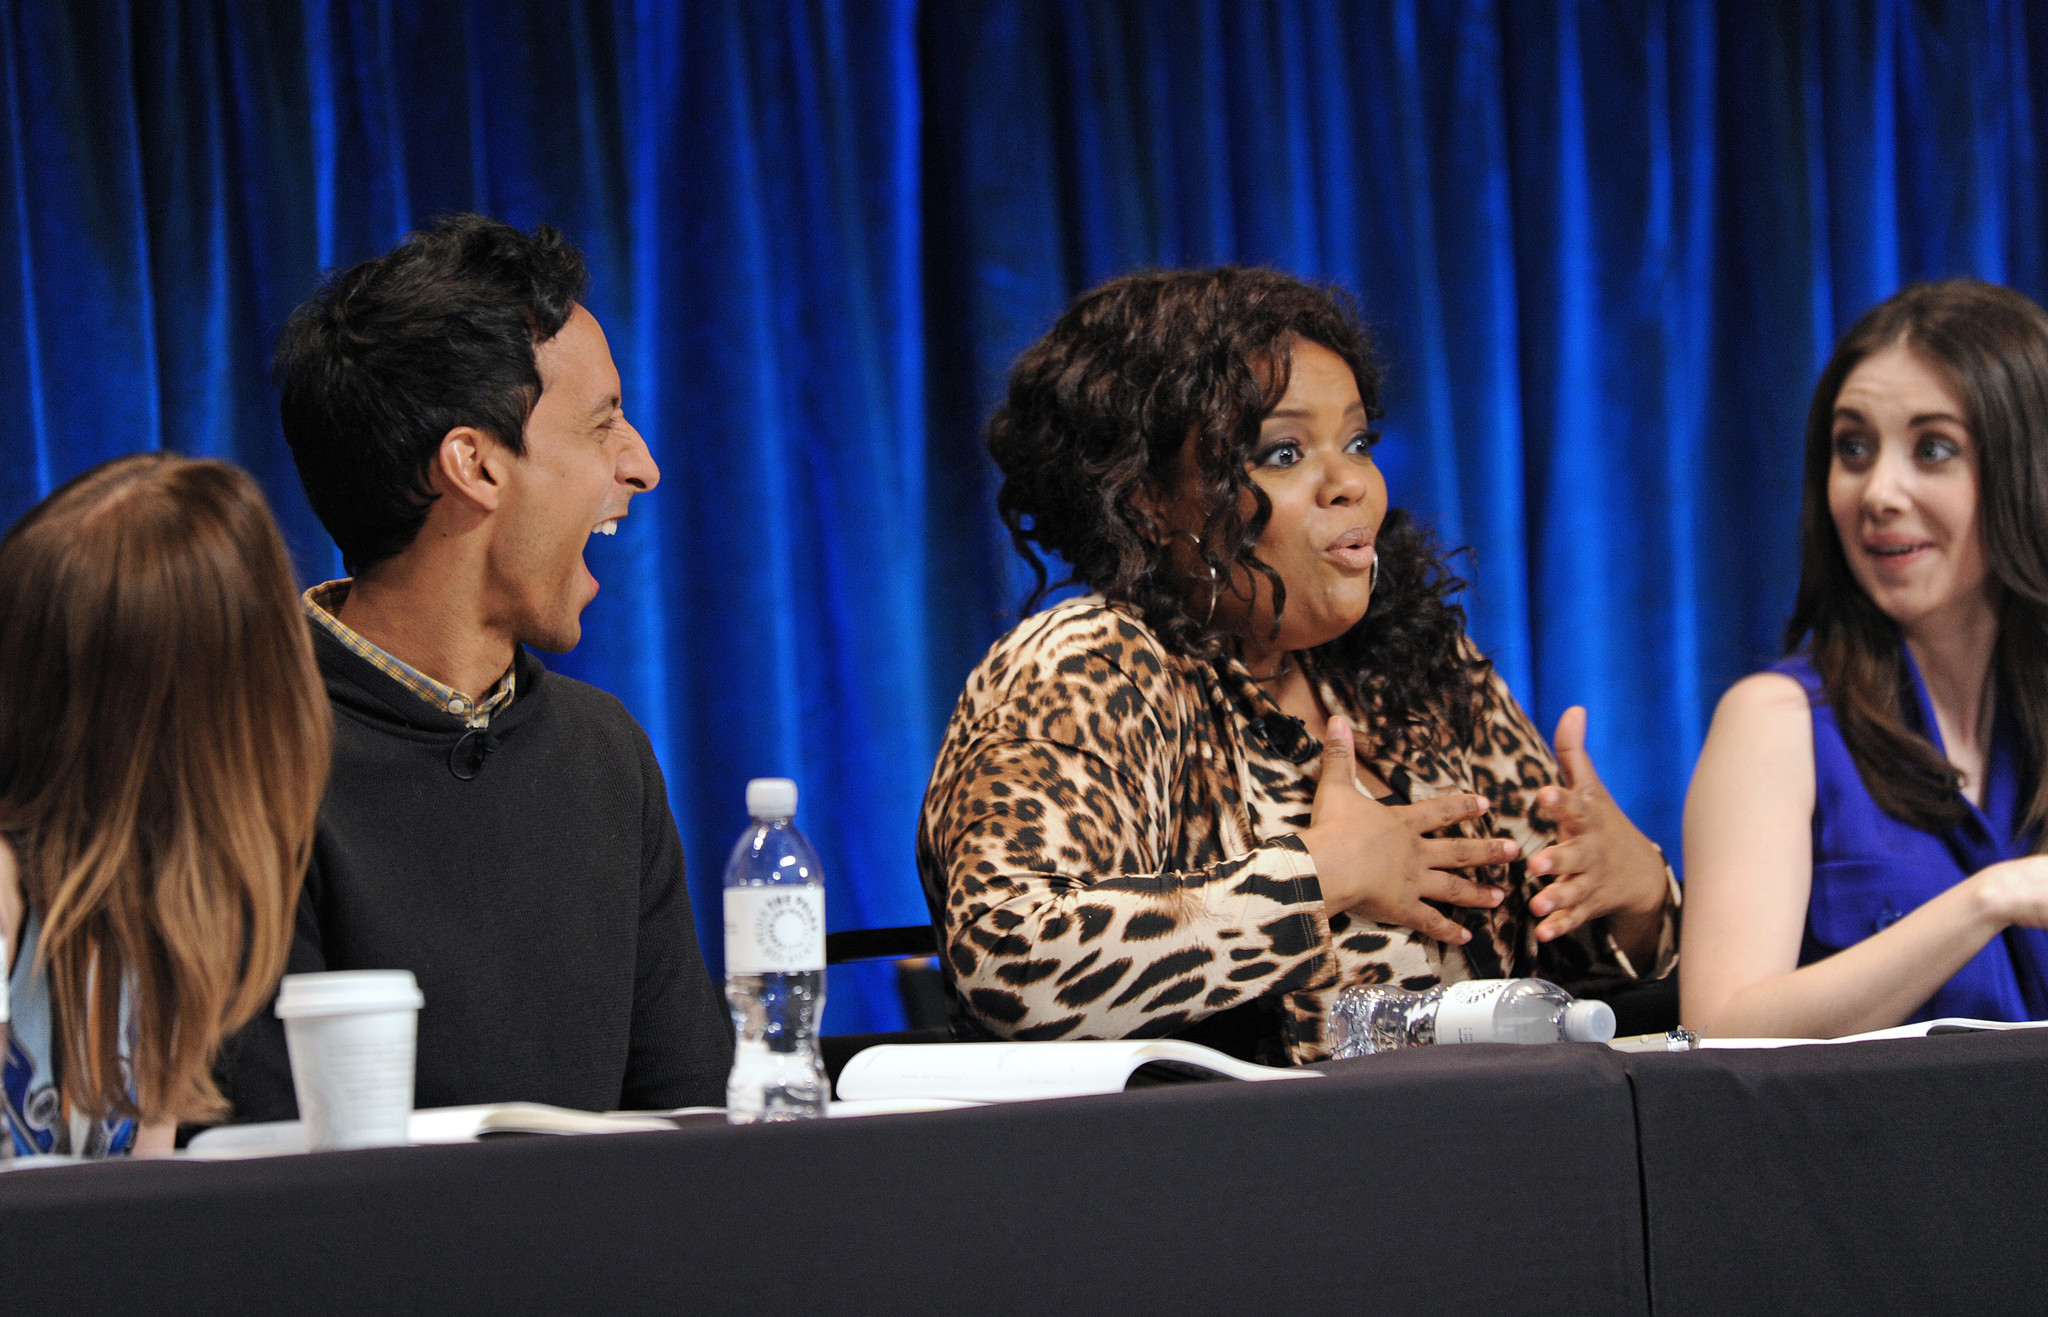 Yvette Nicole Brown, Alison Brie and Danny Pudi at event of Community (2009)